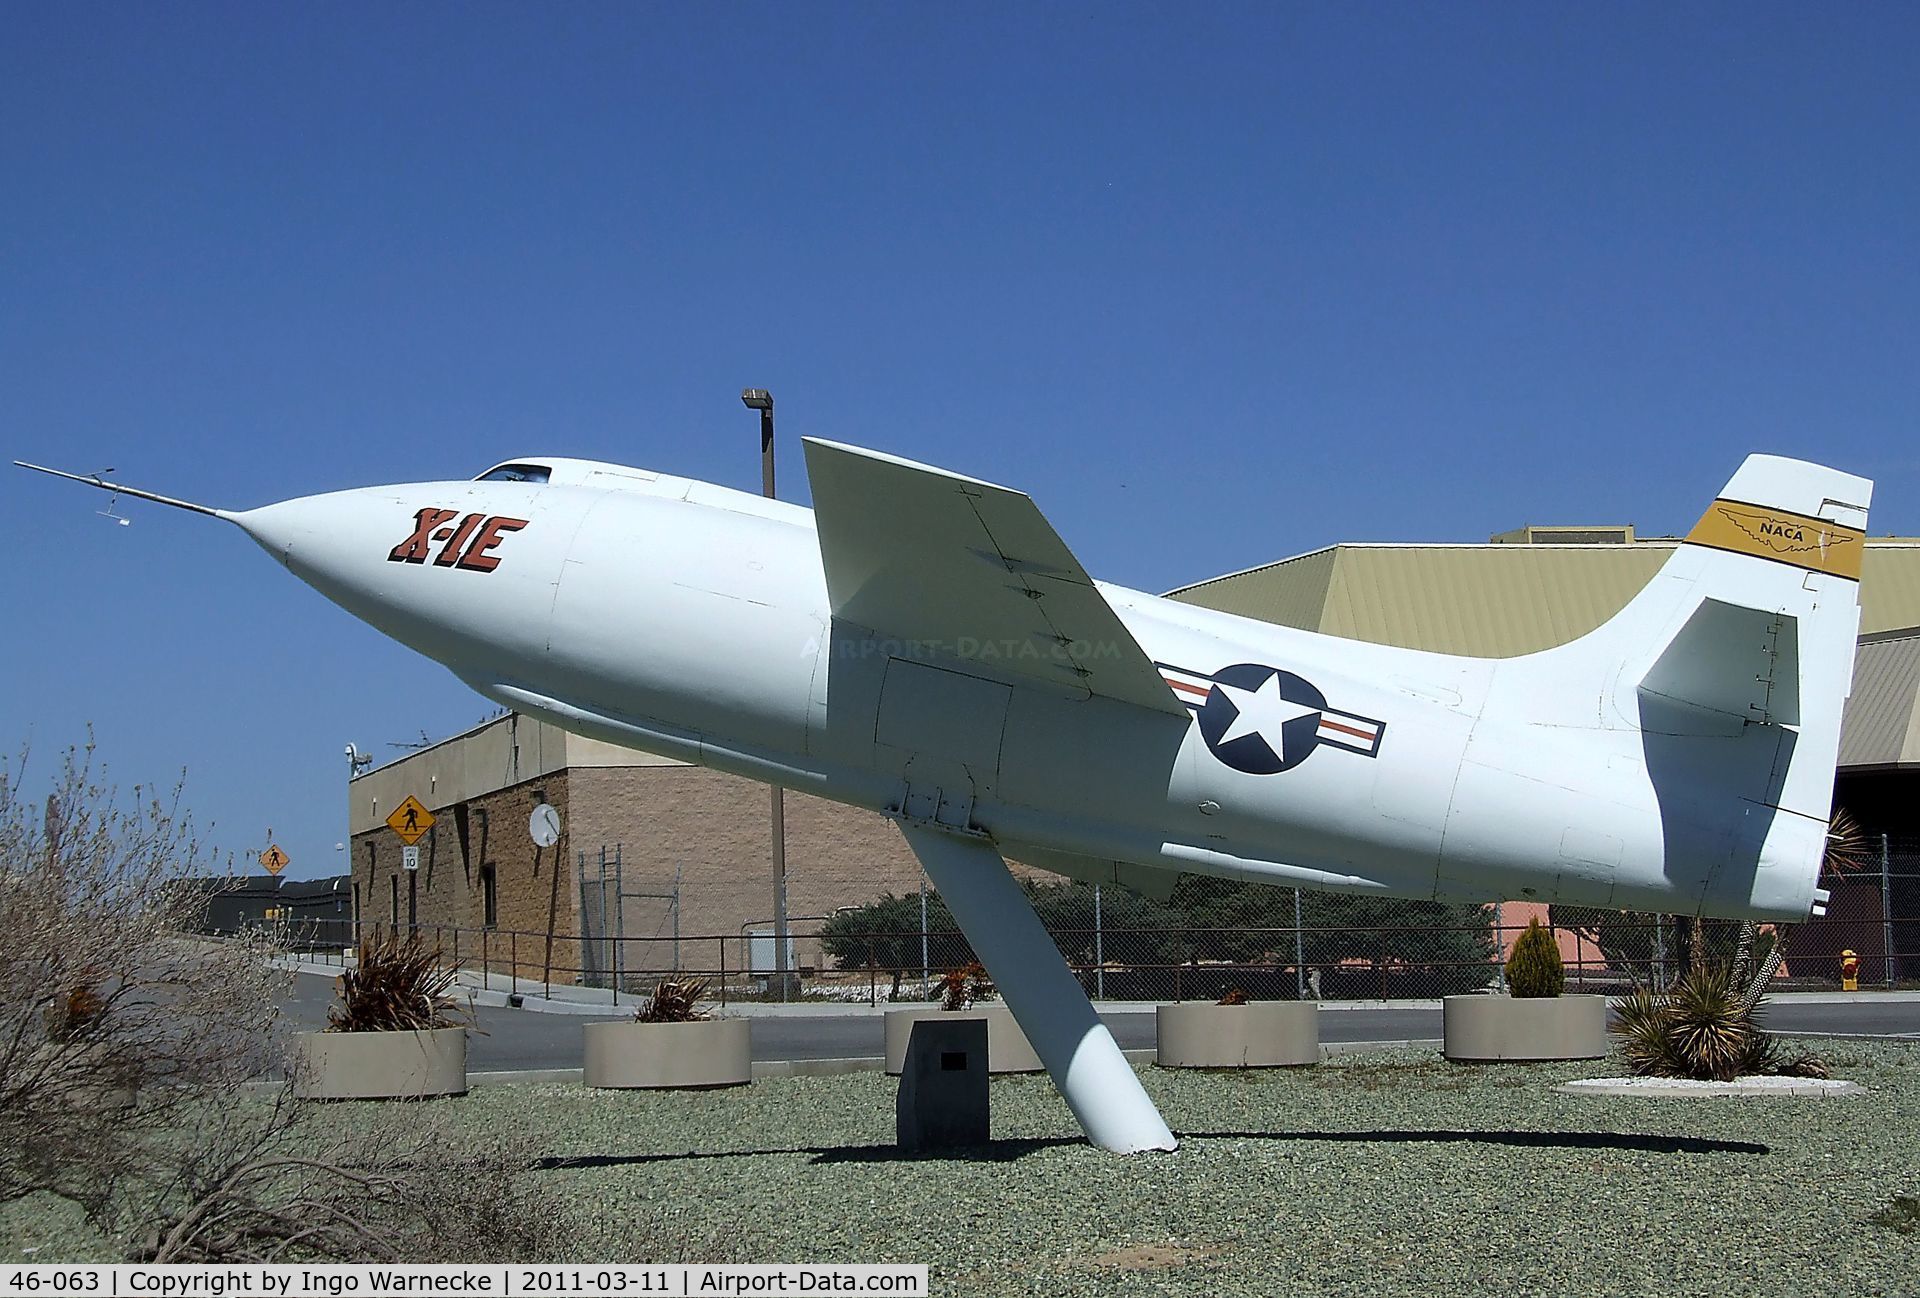 46-063, Bell X-1E C/N 0002, Bell X-1E at the NASA Dryden Flight Research Center, Edwards AFB, CA